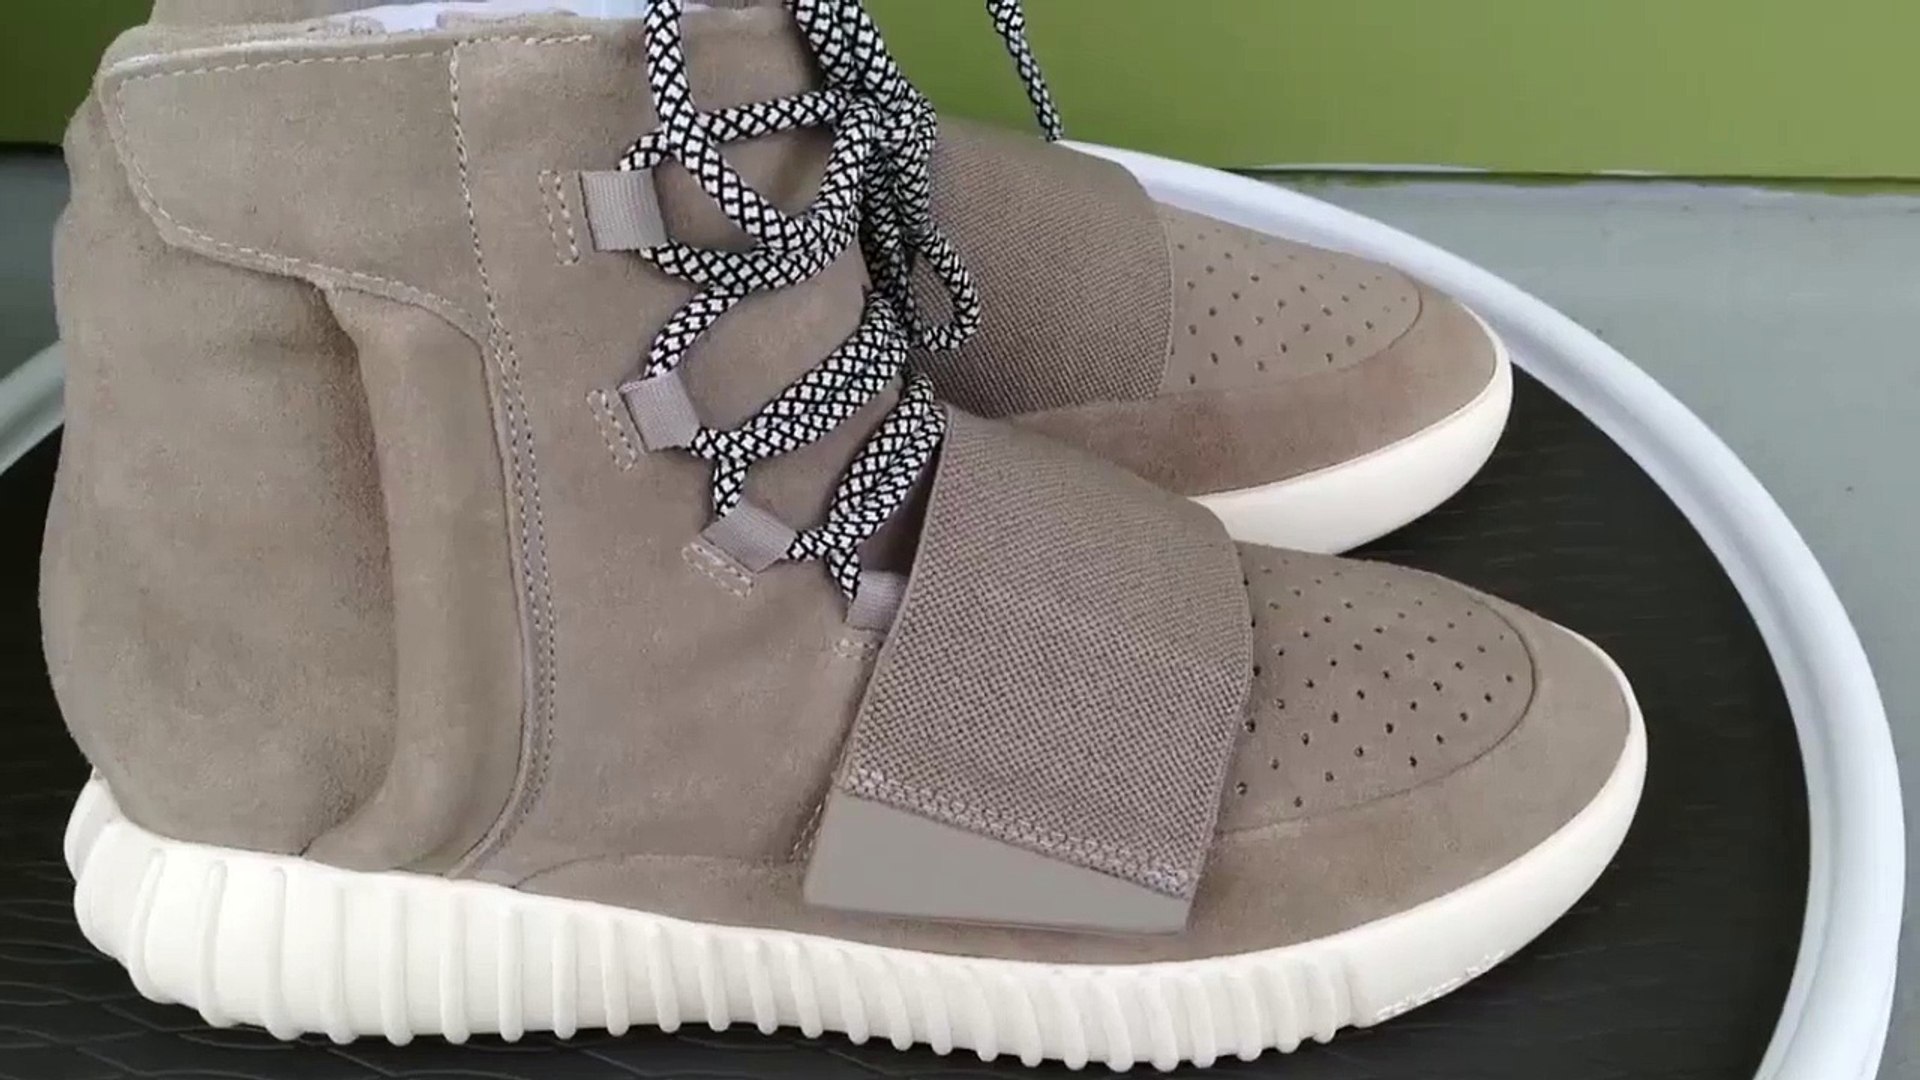 Adidas Yeezy 750 Boost Review (part 1) - video Dailymotion